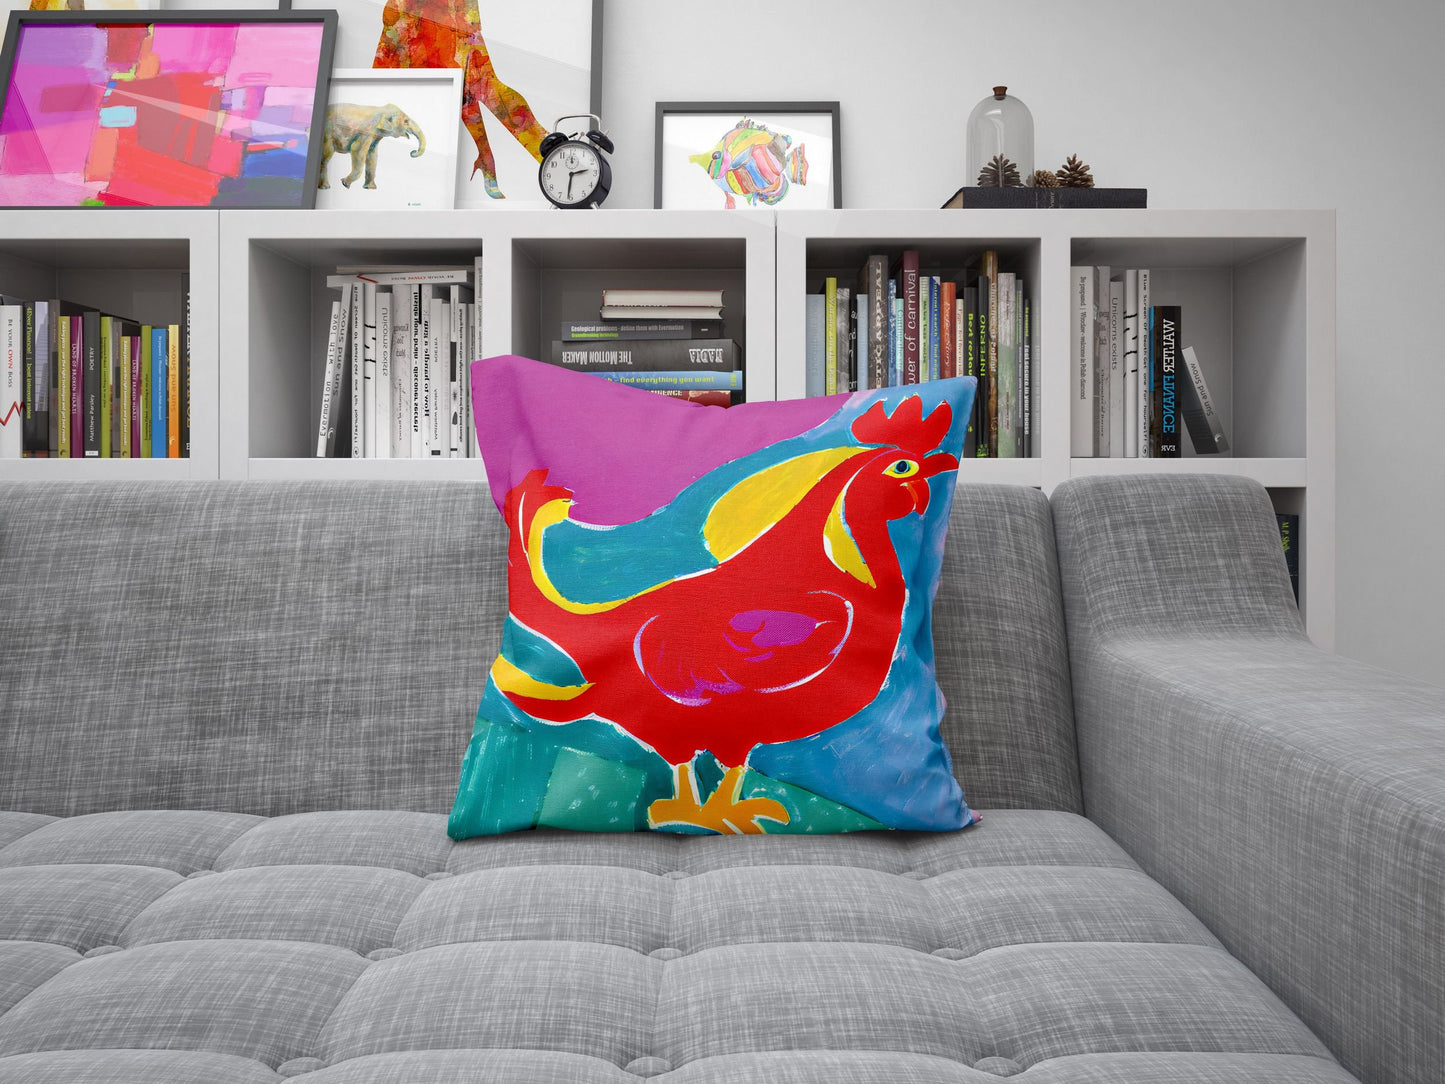 Original Art Rooster Pillow Case, Abstract Throw Pillow Cover, Soft Pillow Cases, Colorful Pillow Case, Beautiful Pillow